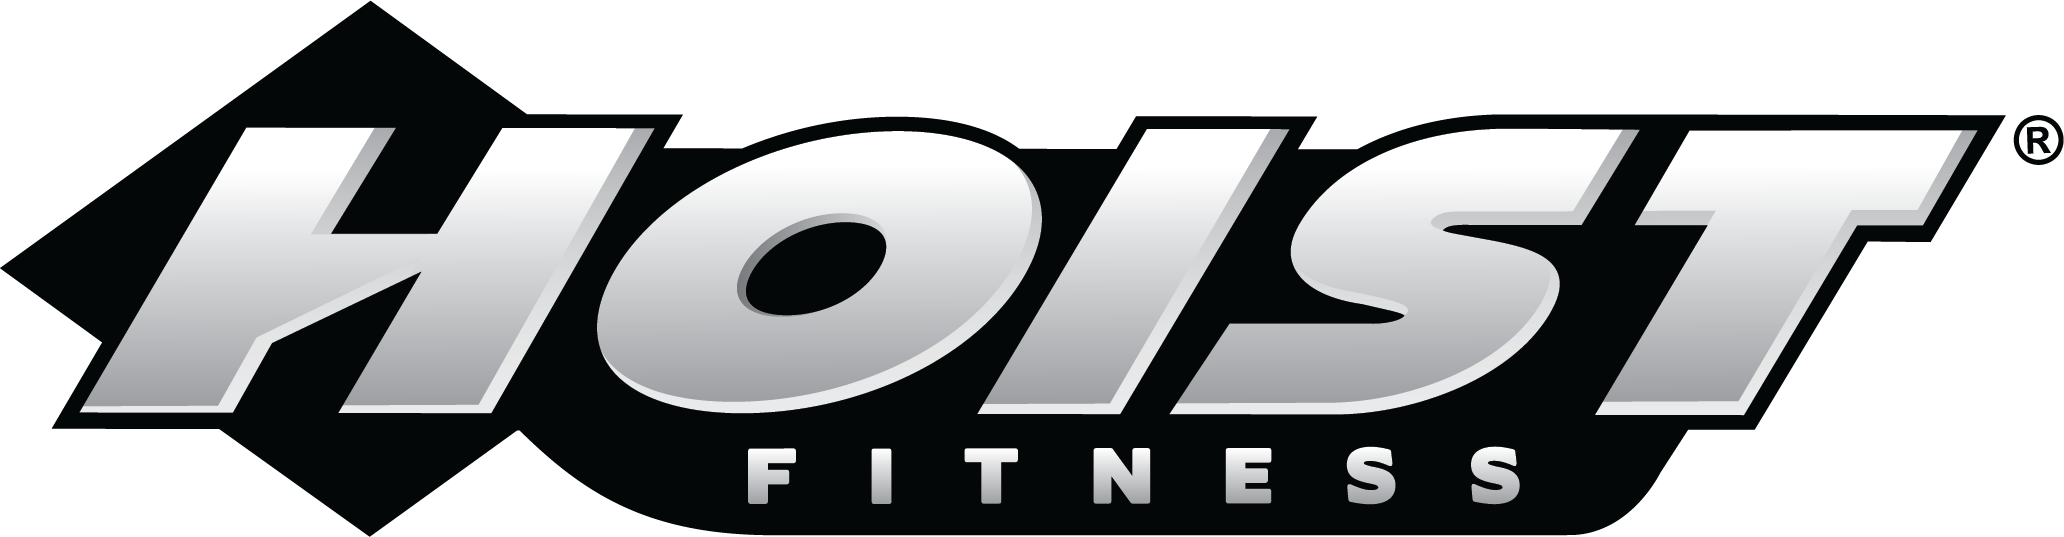 Hoist Fitness Commercial Free Weight